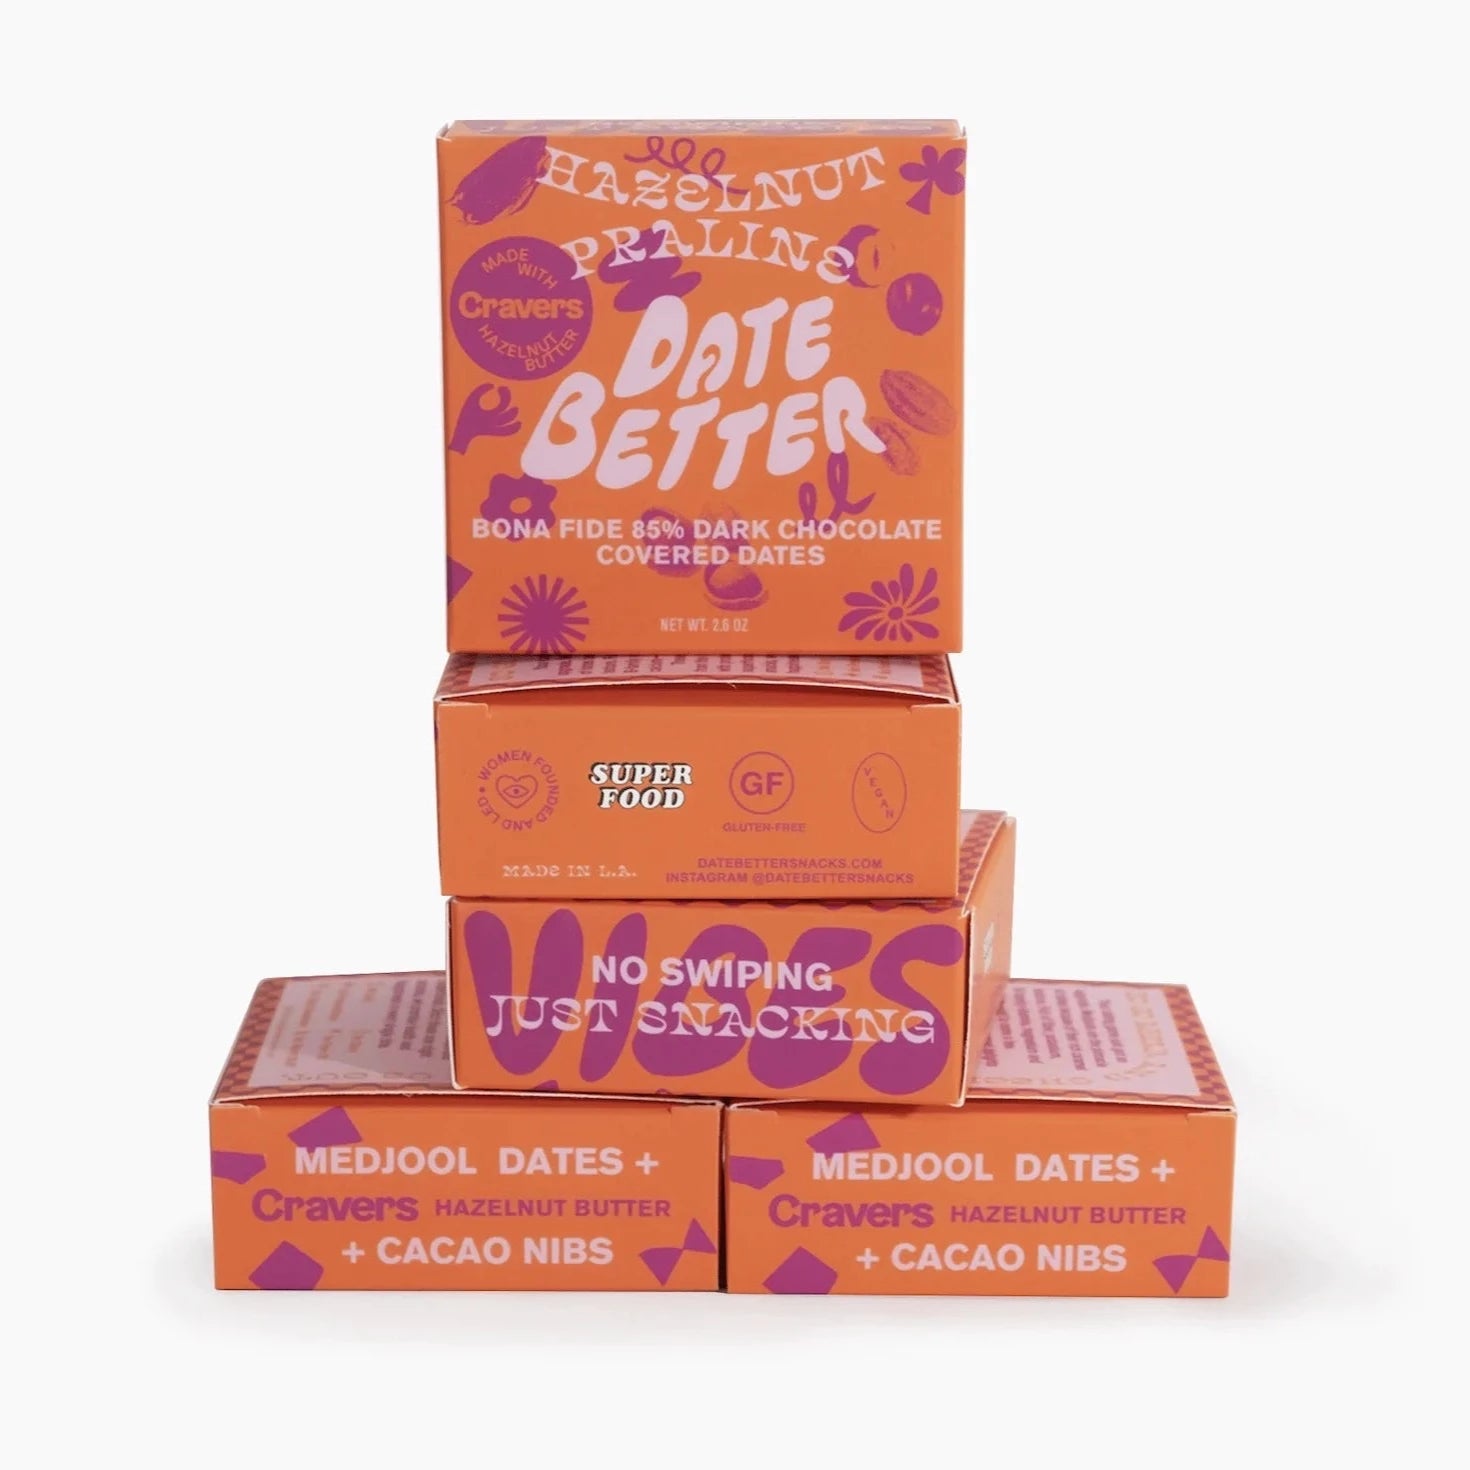 Orange square box with purple illustrations all over it. Text is on the front and in white. Text Reads &quot;hazelnut praline date better bonafide 85% dark chocolate covered dates&quot;